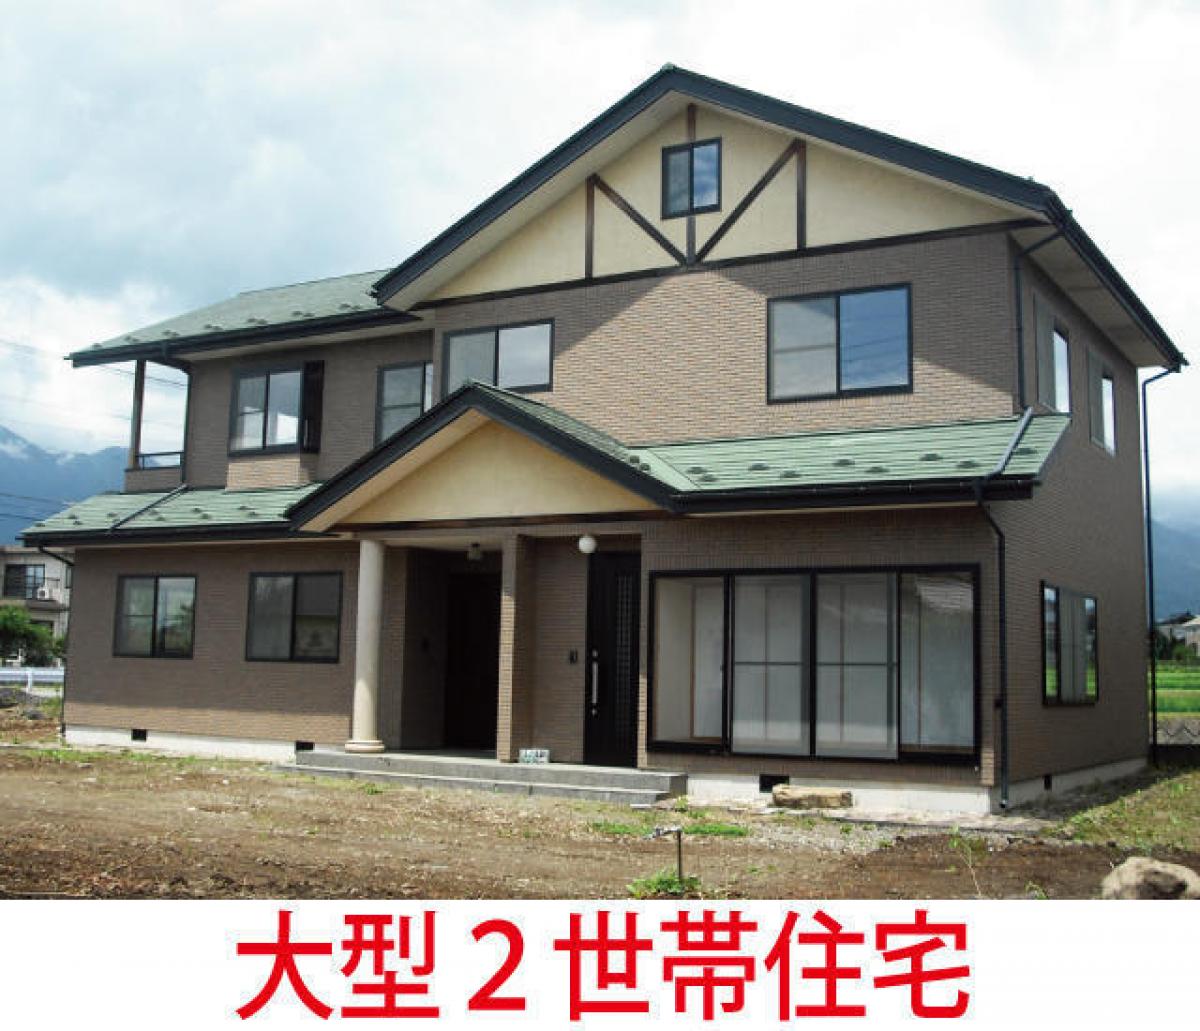 Picture of Home For Sale in Komagane Shi, Nagano, Japan